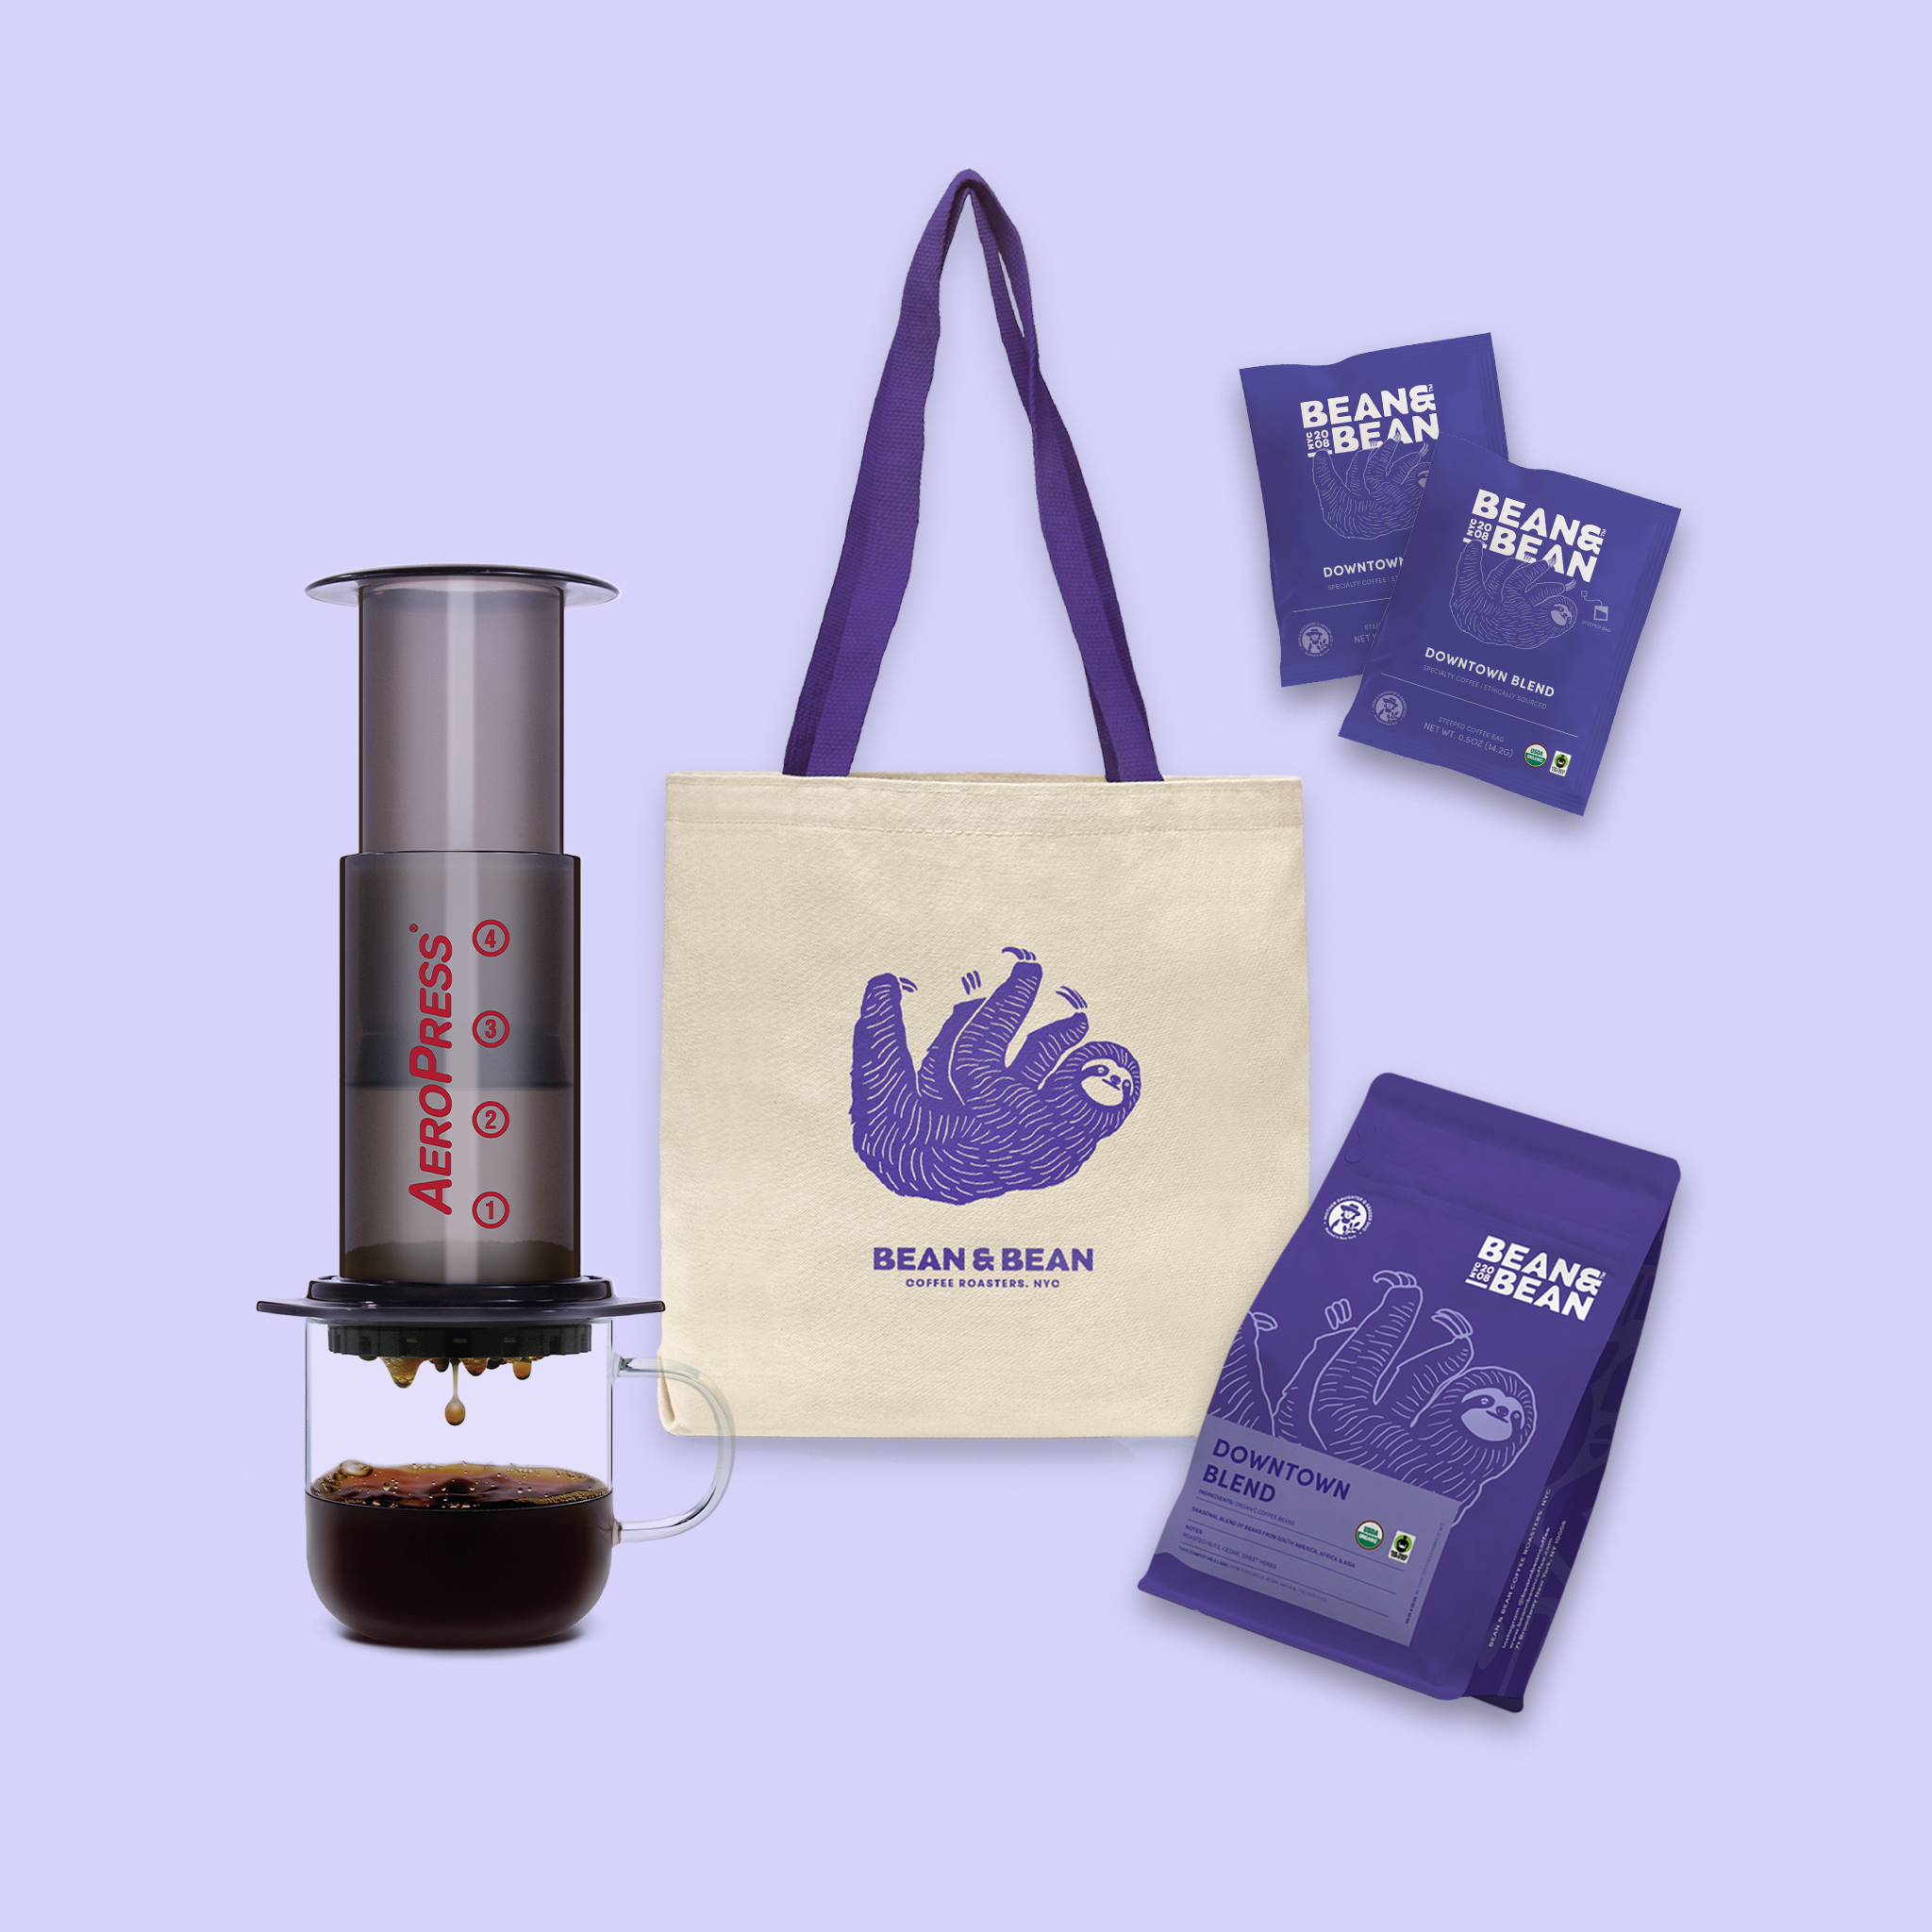 Bean & Bean NYC Aeropress Brew Anywhere Kit with Aeropress Coffee Maker and Components, Bean and Bean Dunk and Steep Coffee Tea Bags, Bean and Bean Handmade Tote Bag with Sloth Graphic, and Bean and Bean Downtown Blend Coffee Bean Bag 12 Ounces